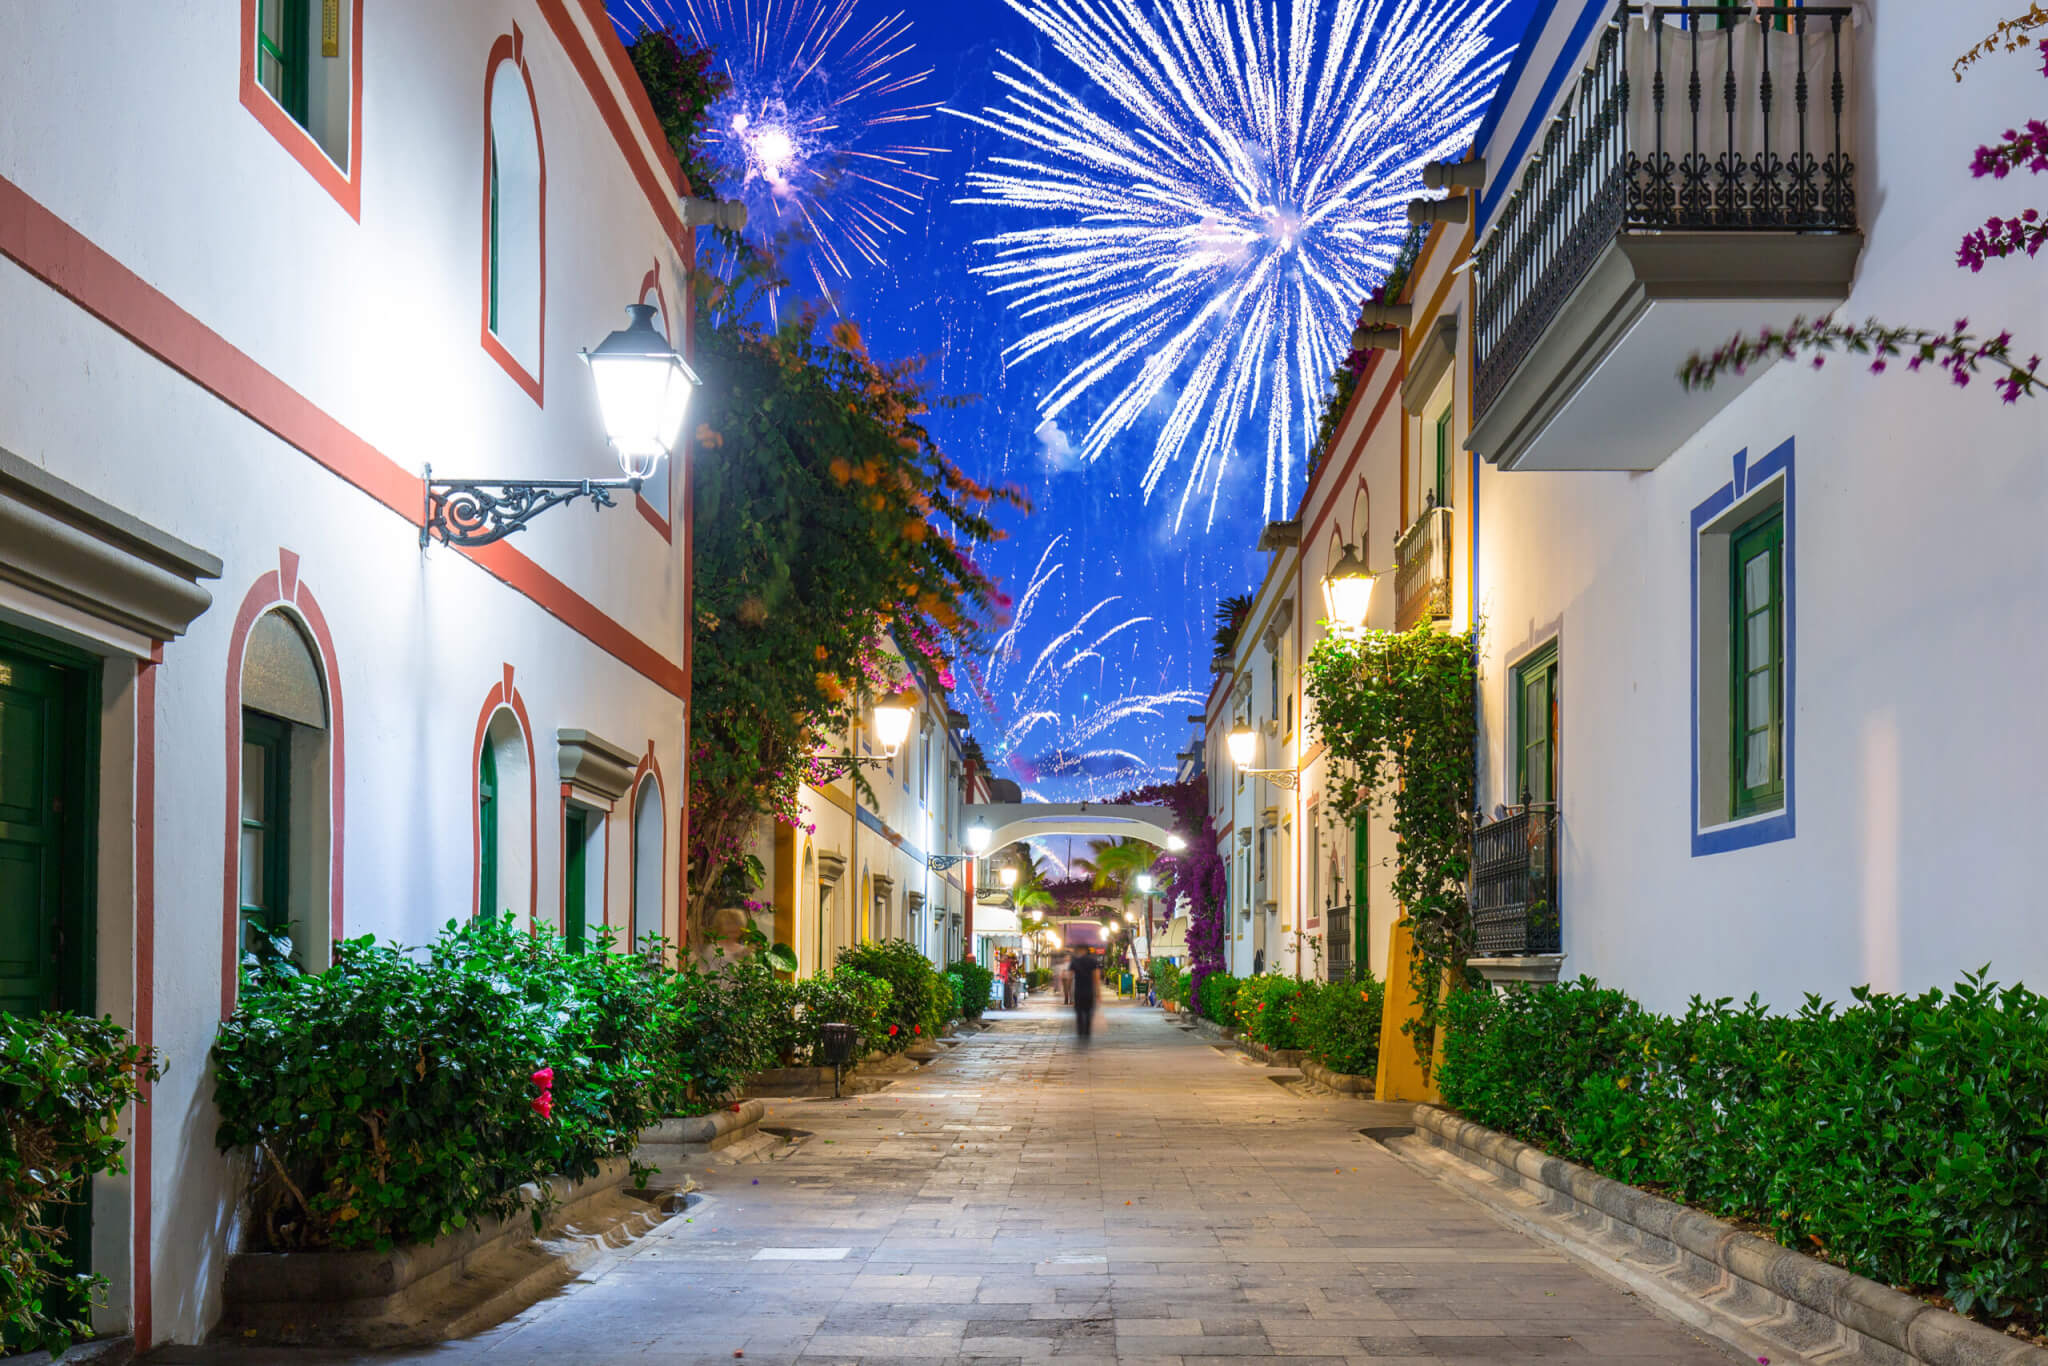 New years fireworks display over the Puerto de Mogan town, Gran Canaria. Spain.